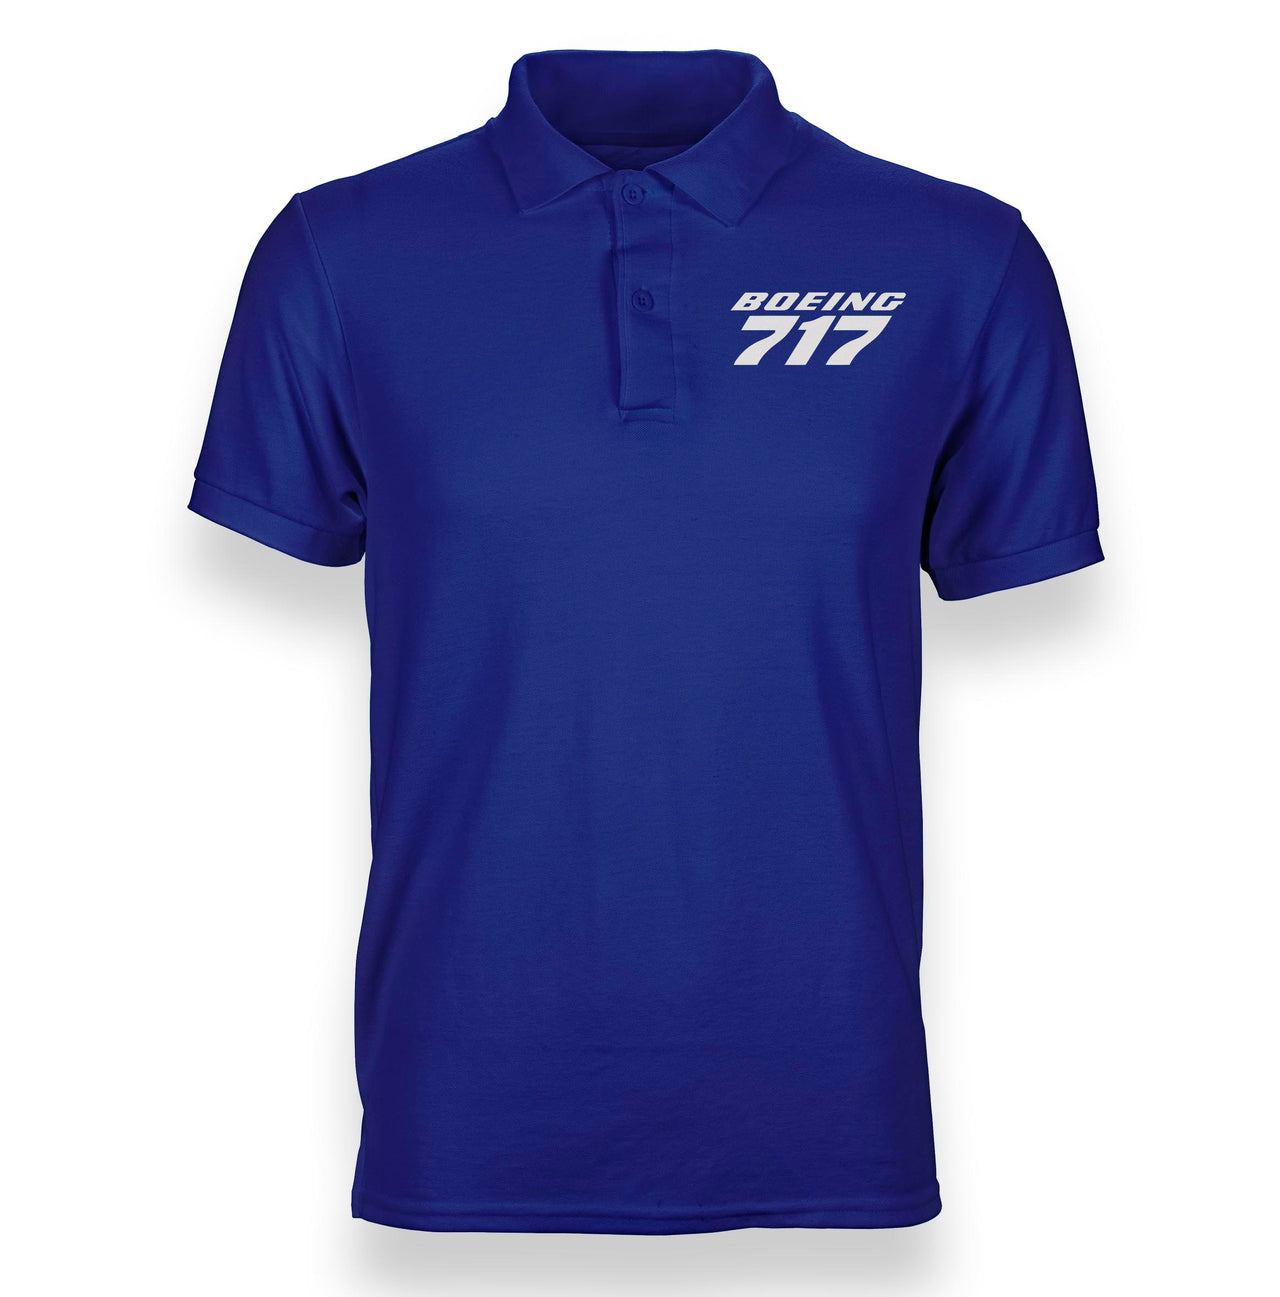 Boeing 717 & Text Designed Polo T-Shirts